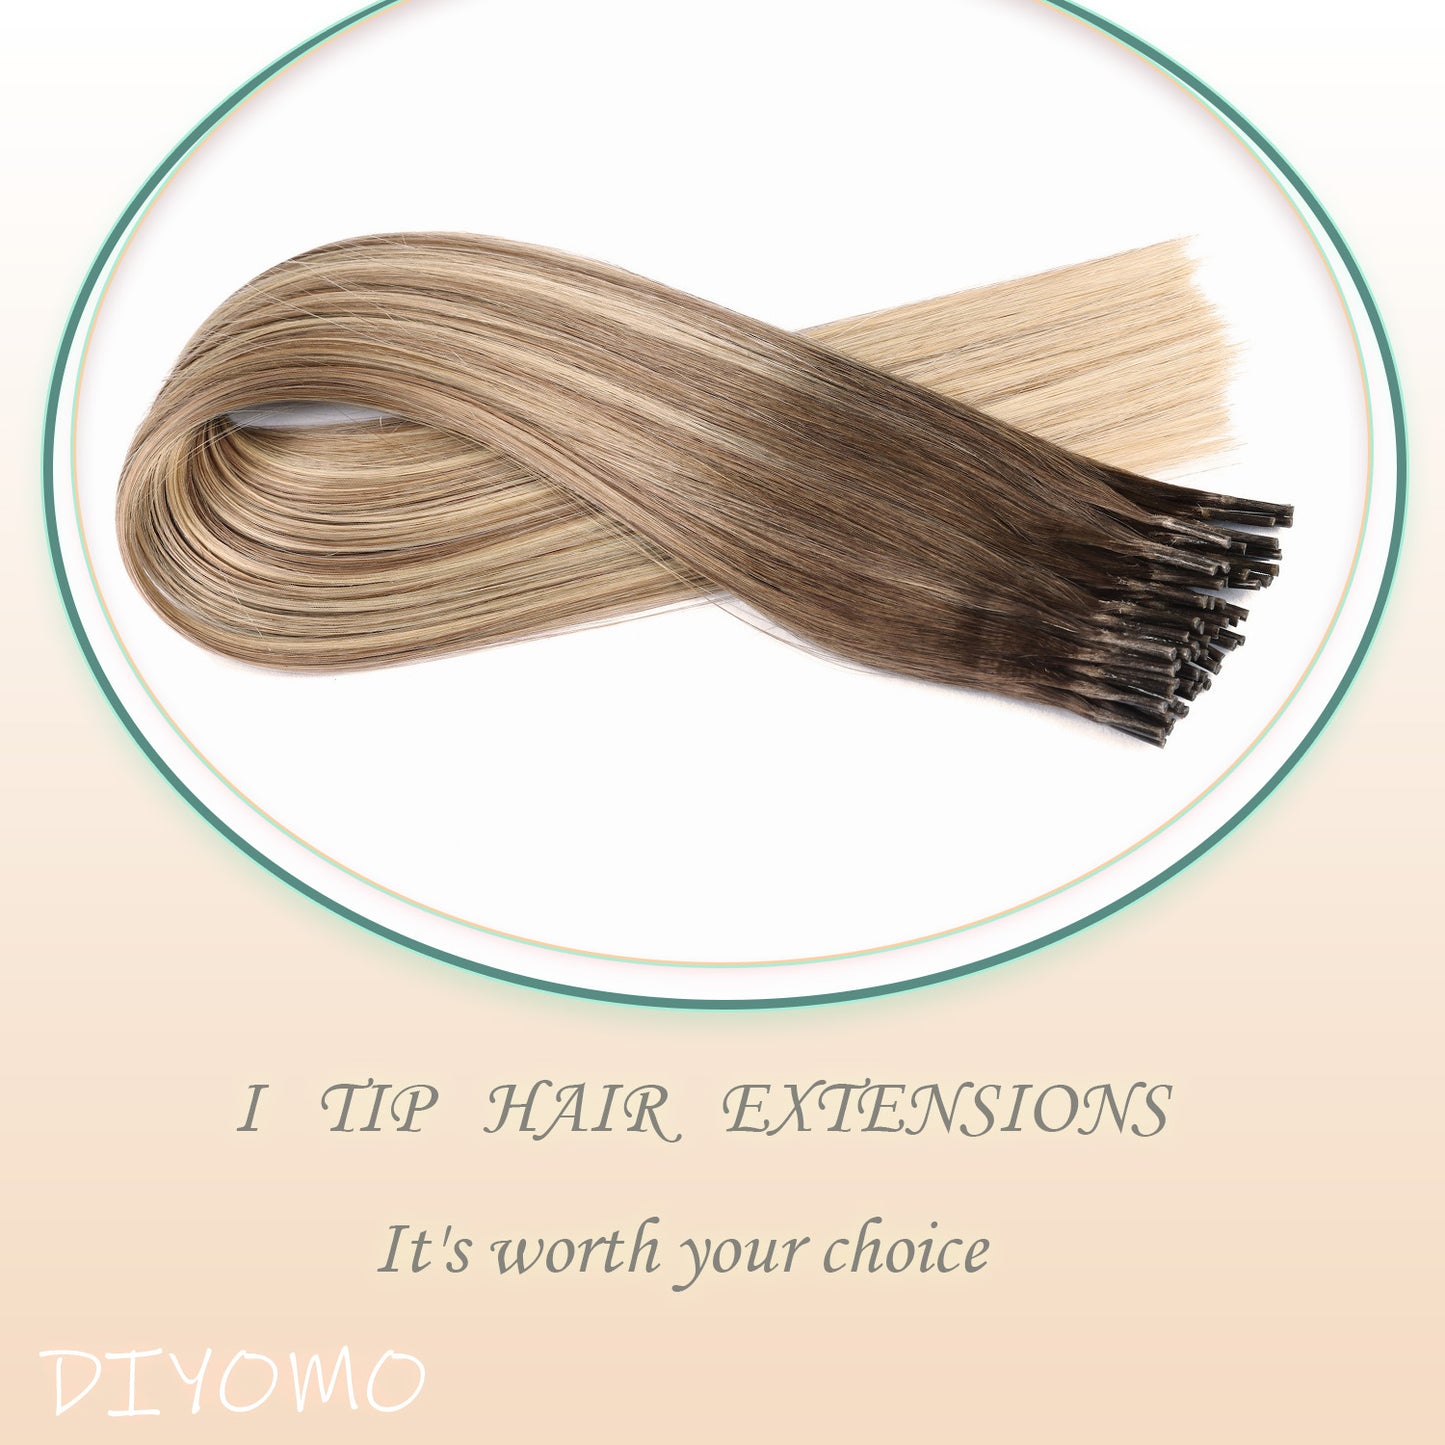 Eliysako  I Tip Hair Extensions Human Hair,Cold Fusion Soft Abnormal Hair Extensions 70 Strands Pre Keratin Bonded, Itip Human Hair Extensions,50g/Pack